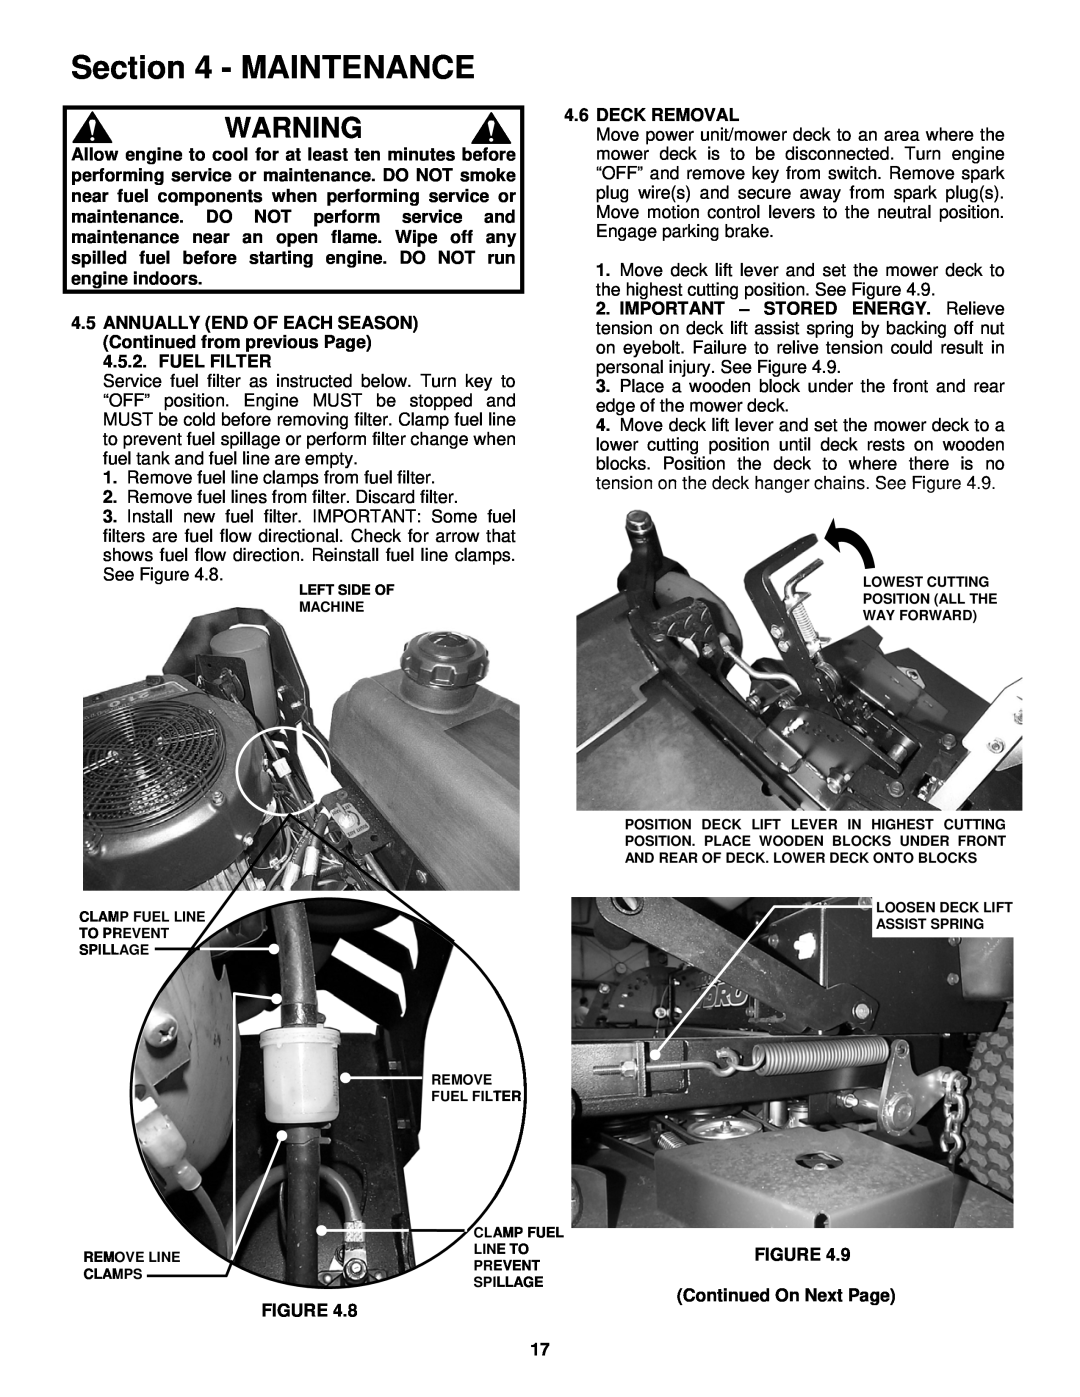 Snapper NZM19481KWV important safety instructions Maintenance, Deck Removal 